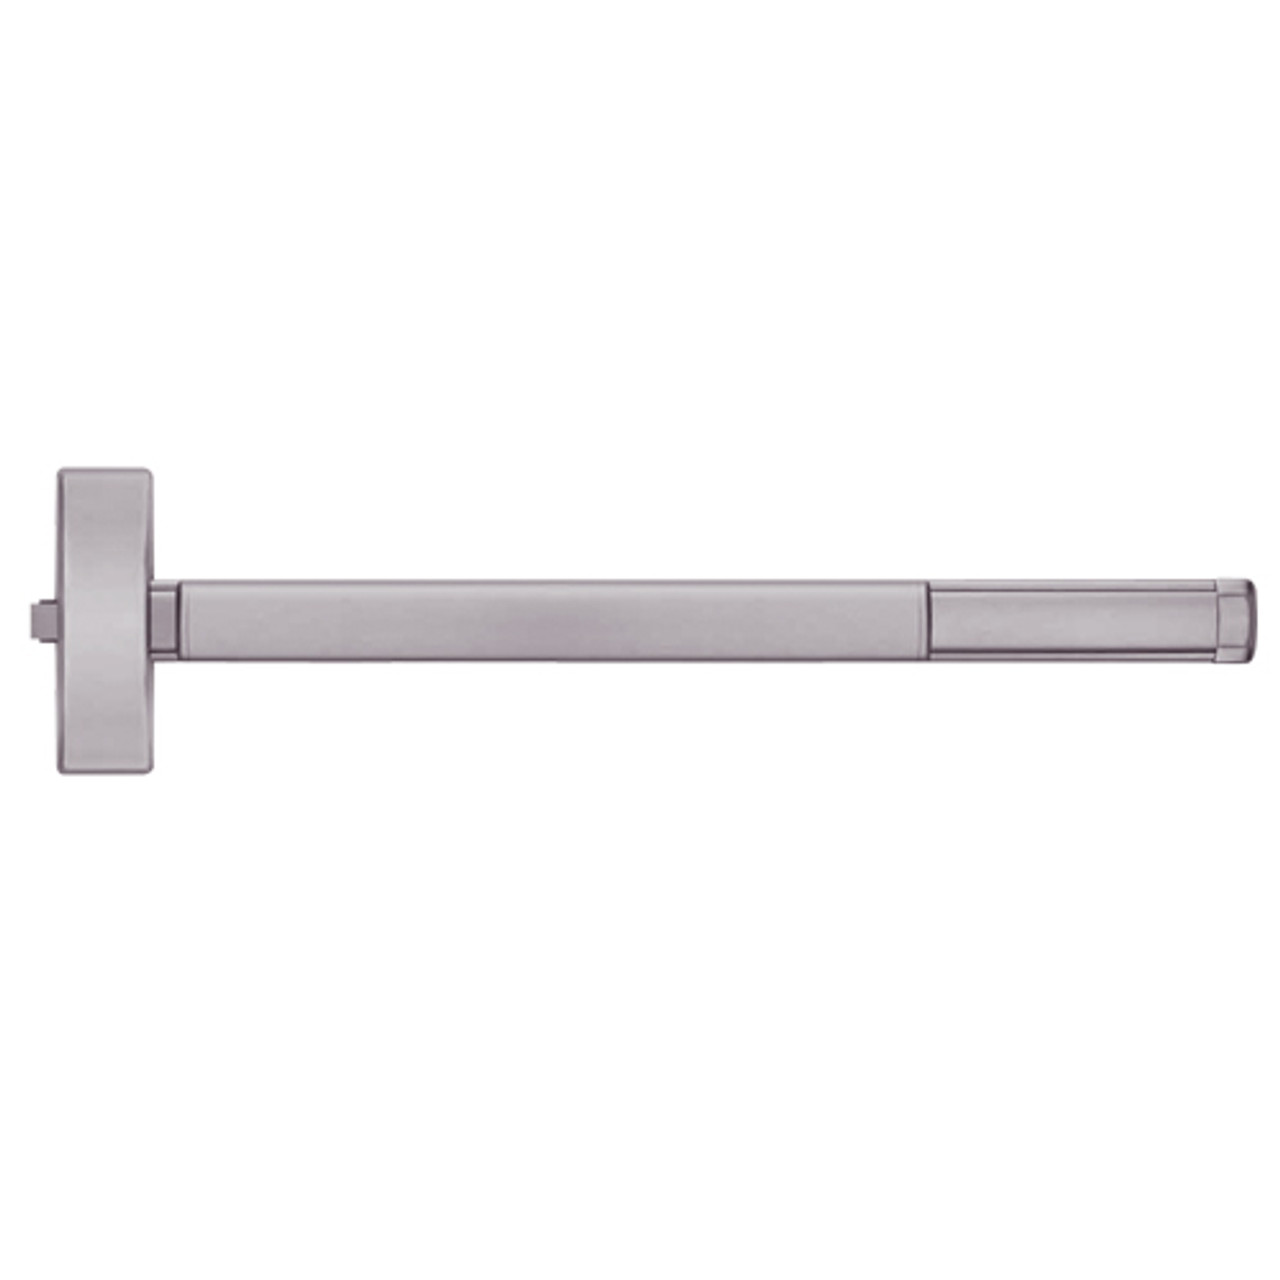 2114CD-630-36 PHI 2100 Series Non Fire Rated Apex Rim Exit Device Prepped for Lever-Knob Always Active with Cylinder Dogging in Satin Stainless Steel Finish